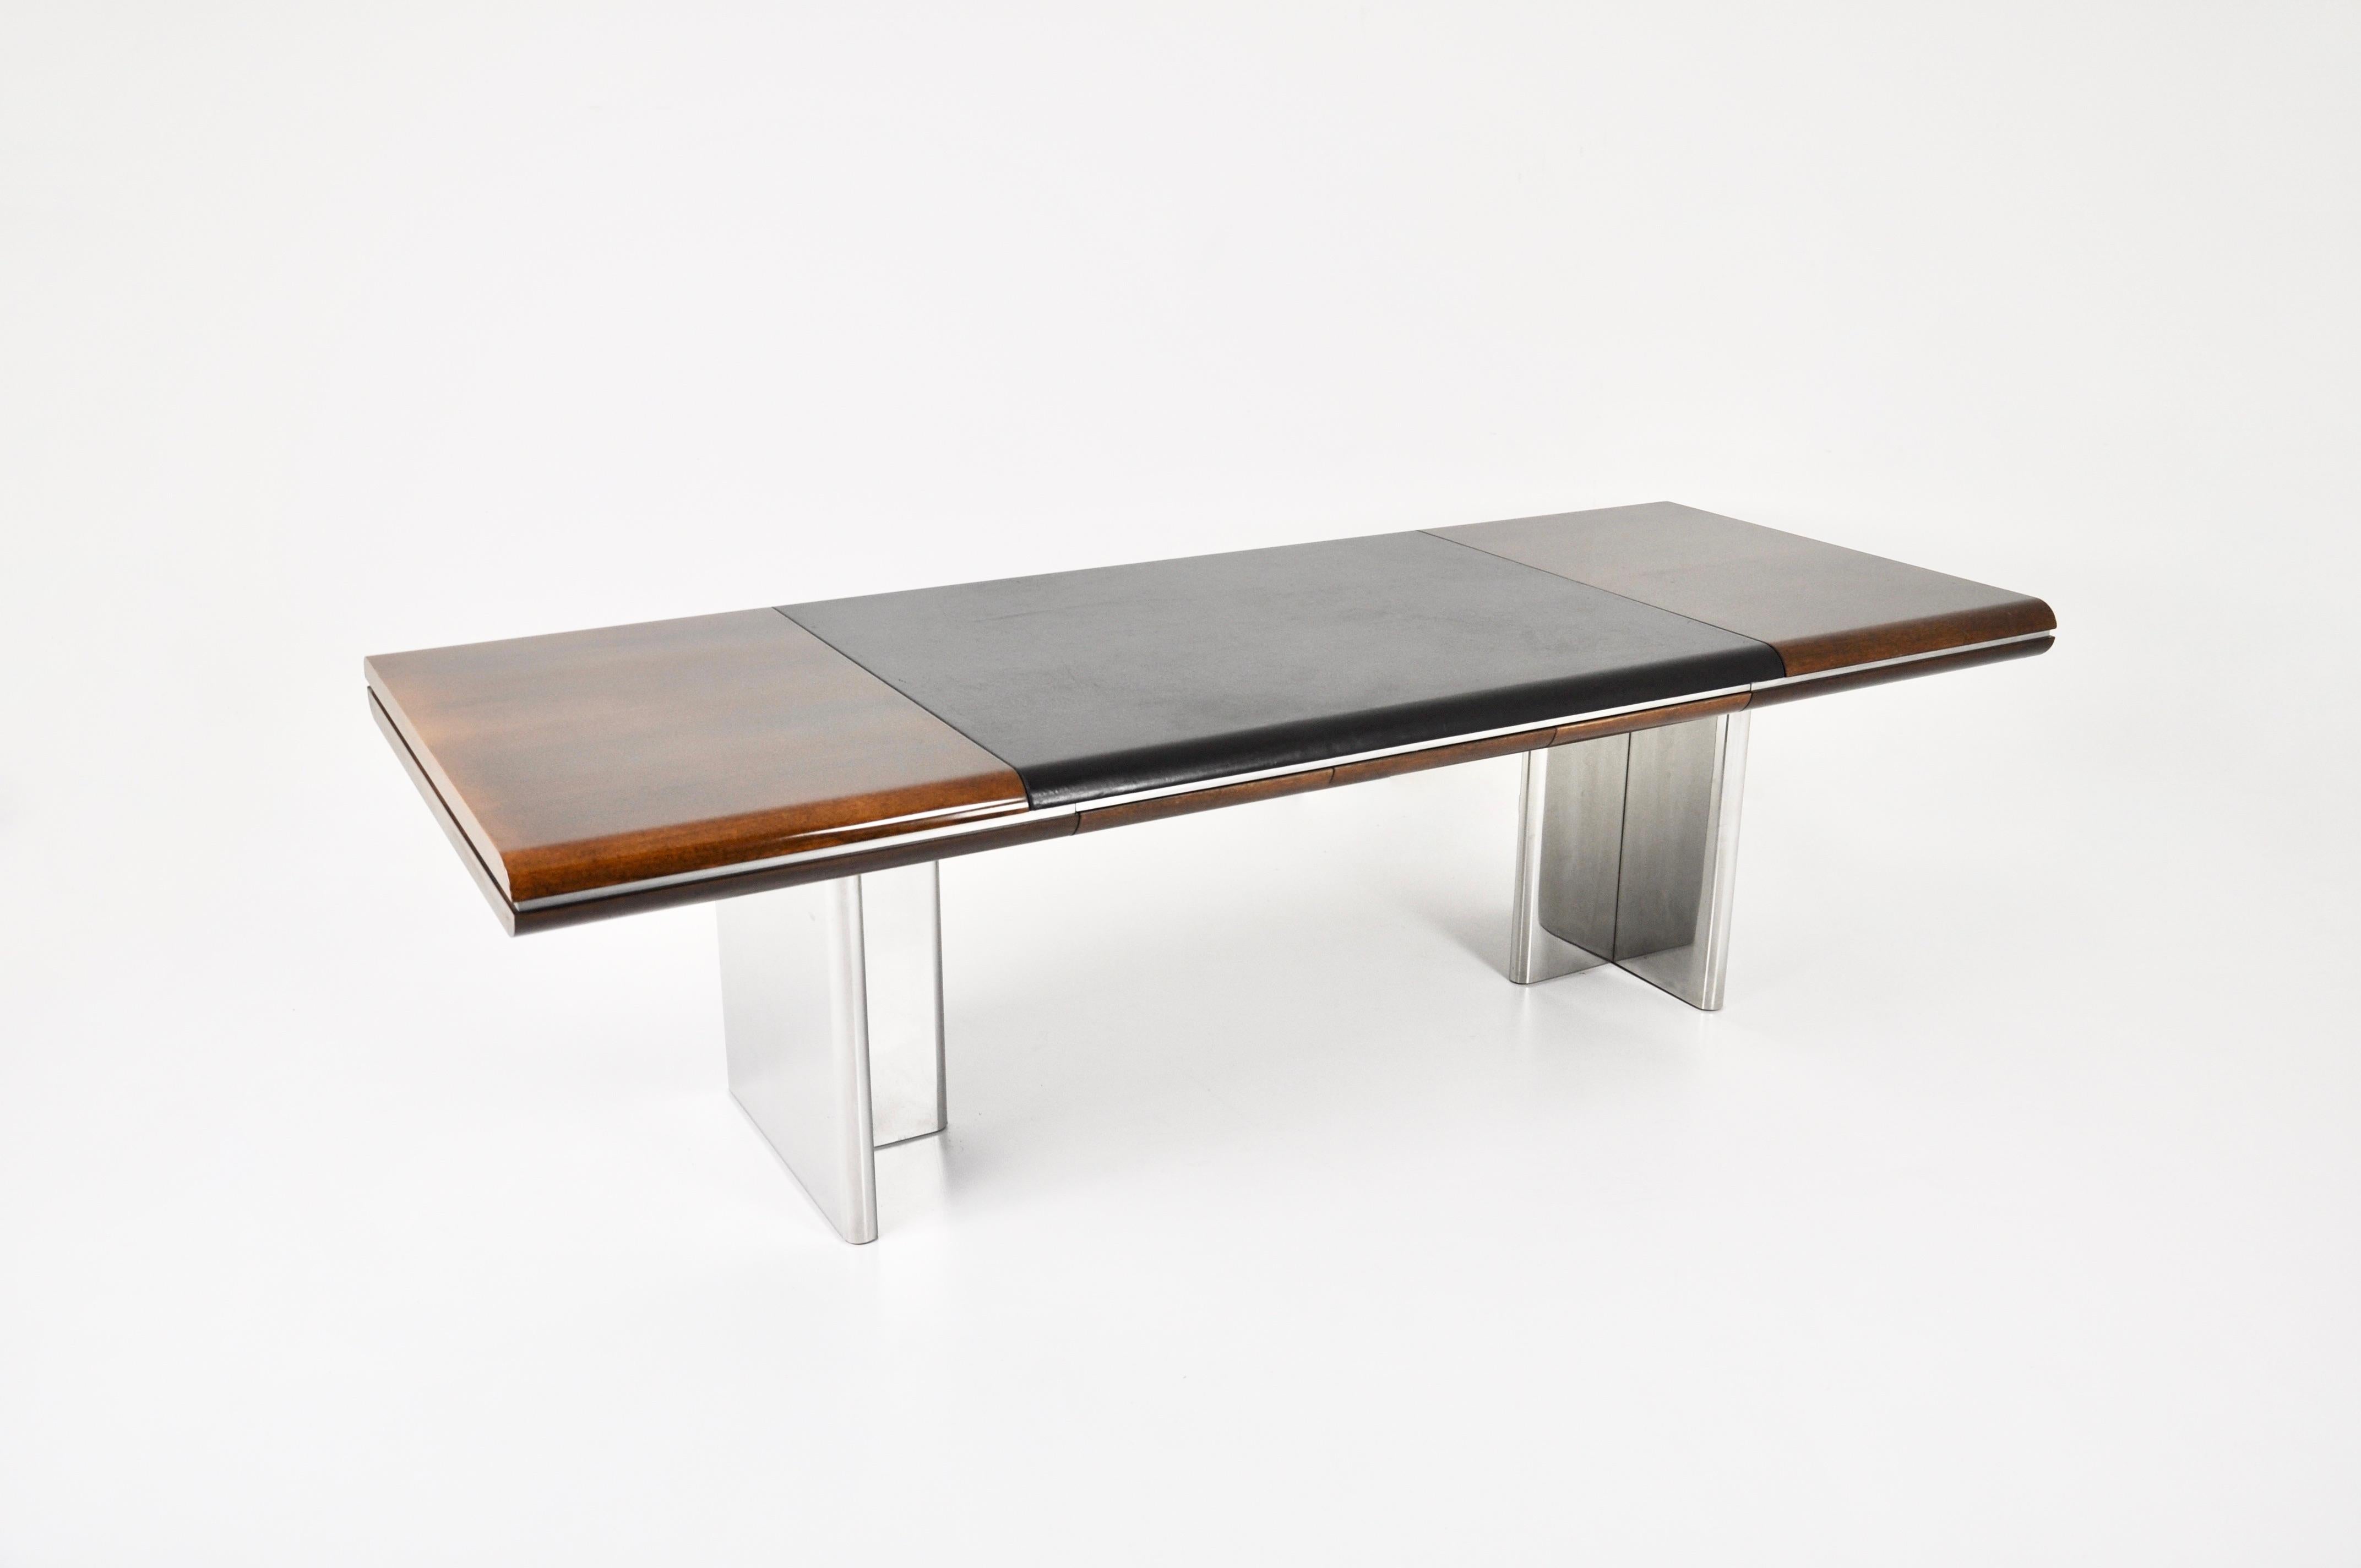 Desk with leather and wood top and chromed metal legs designed by Hans Von Klier in the 70s. 
Wear due to time and age of the desk.